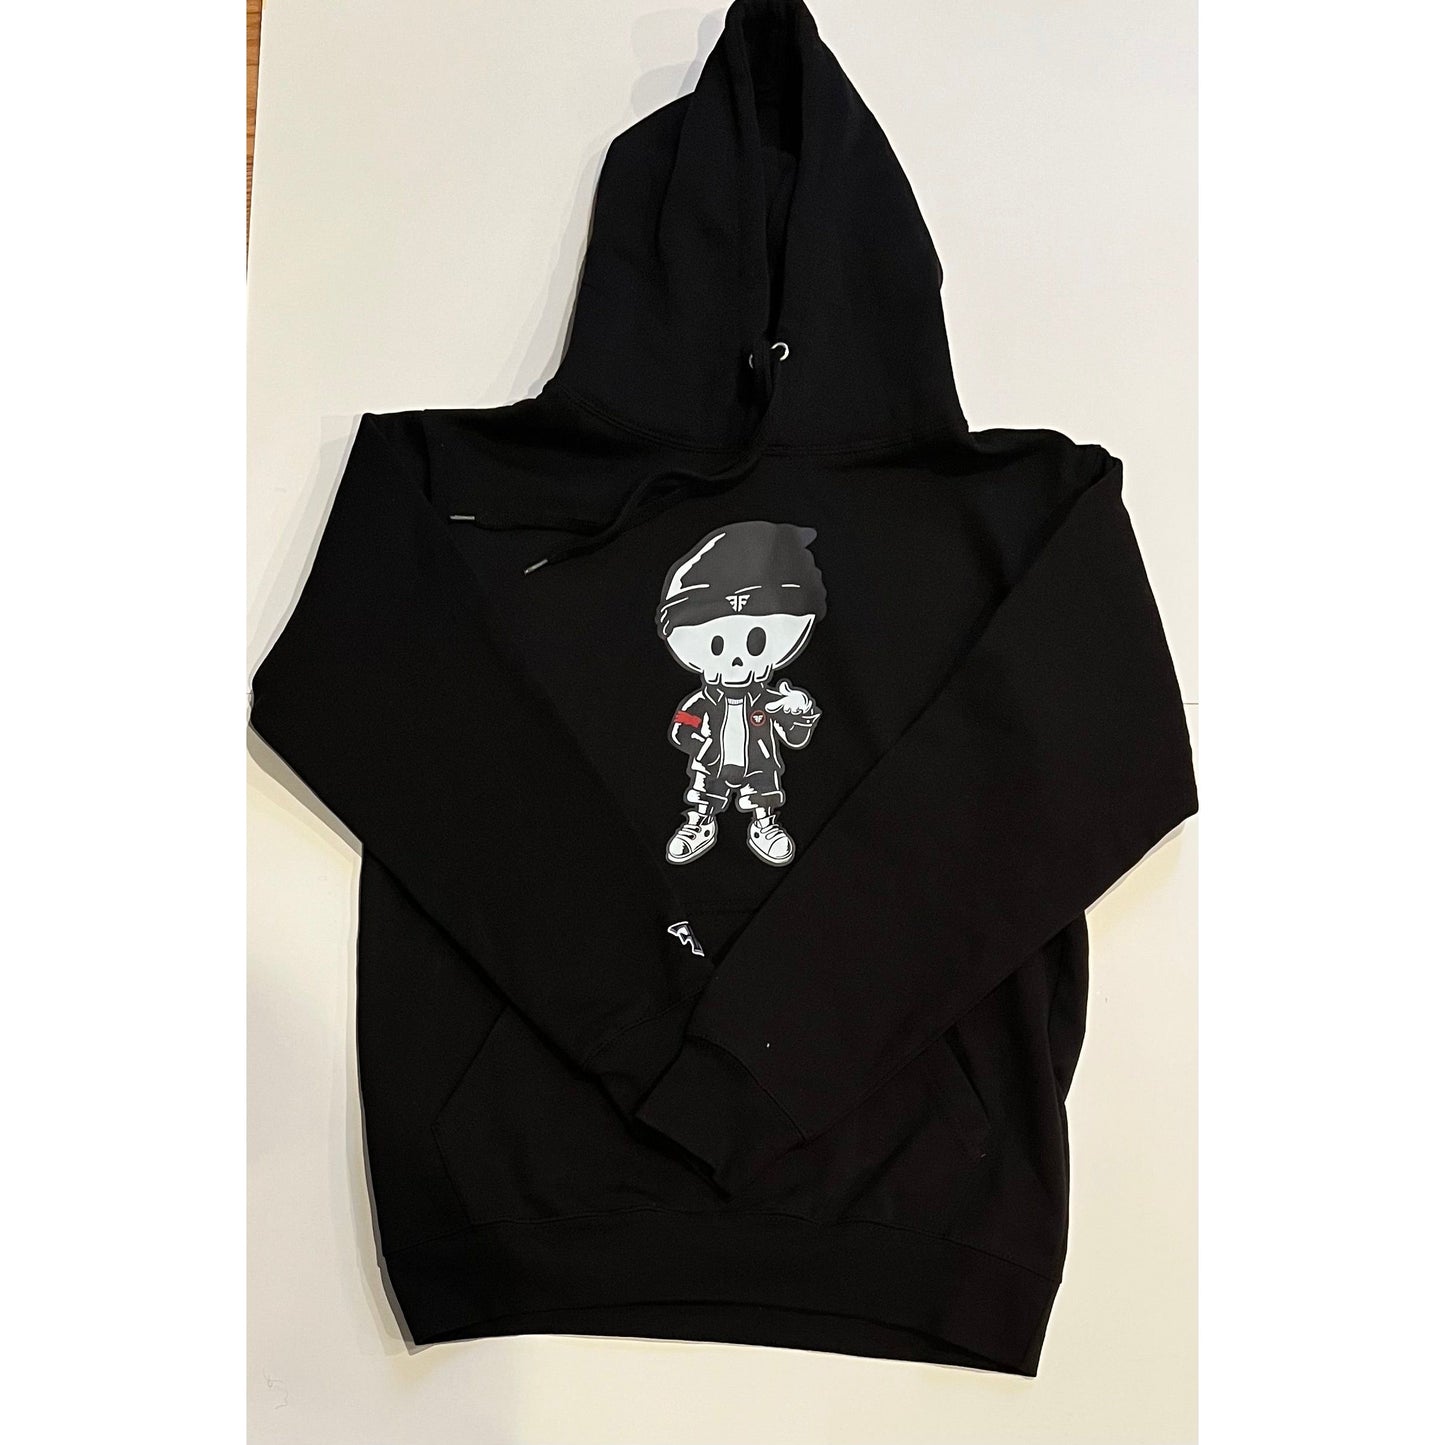 The Family character adult unisex hoodie